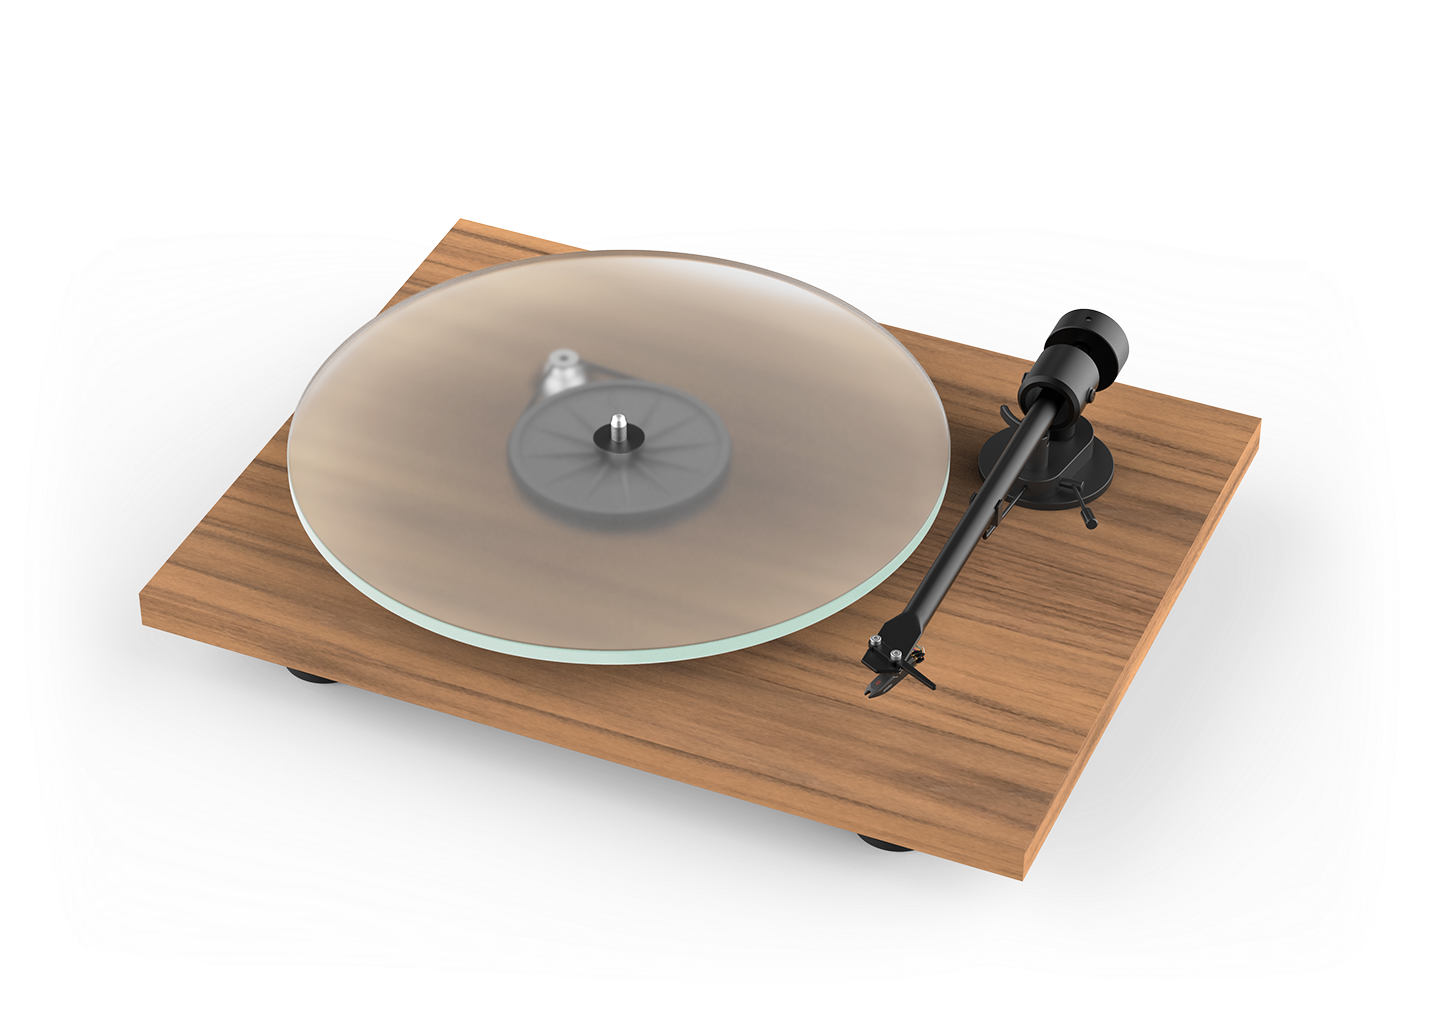 A Record Player With A Clear Disc On A Wooden Surface